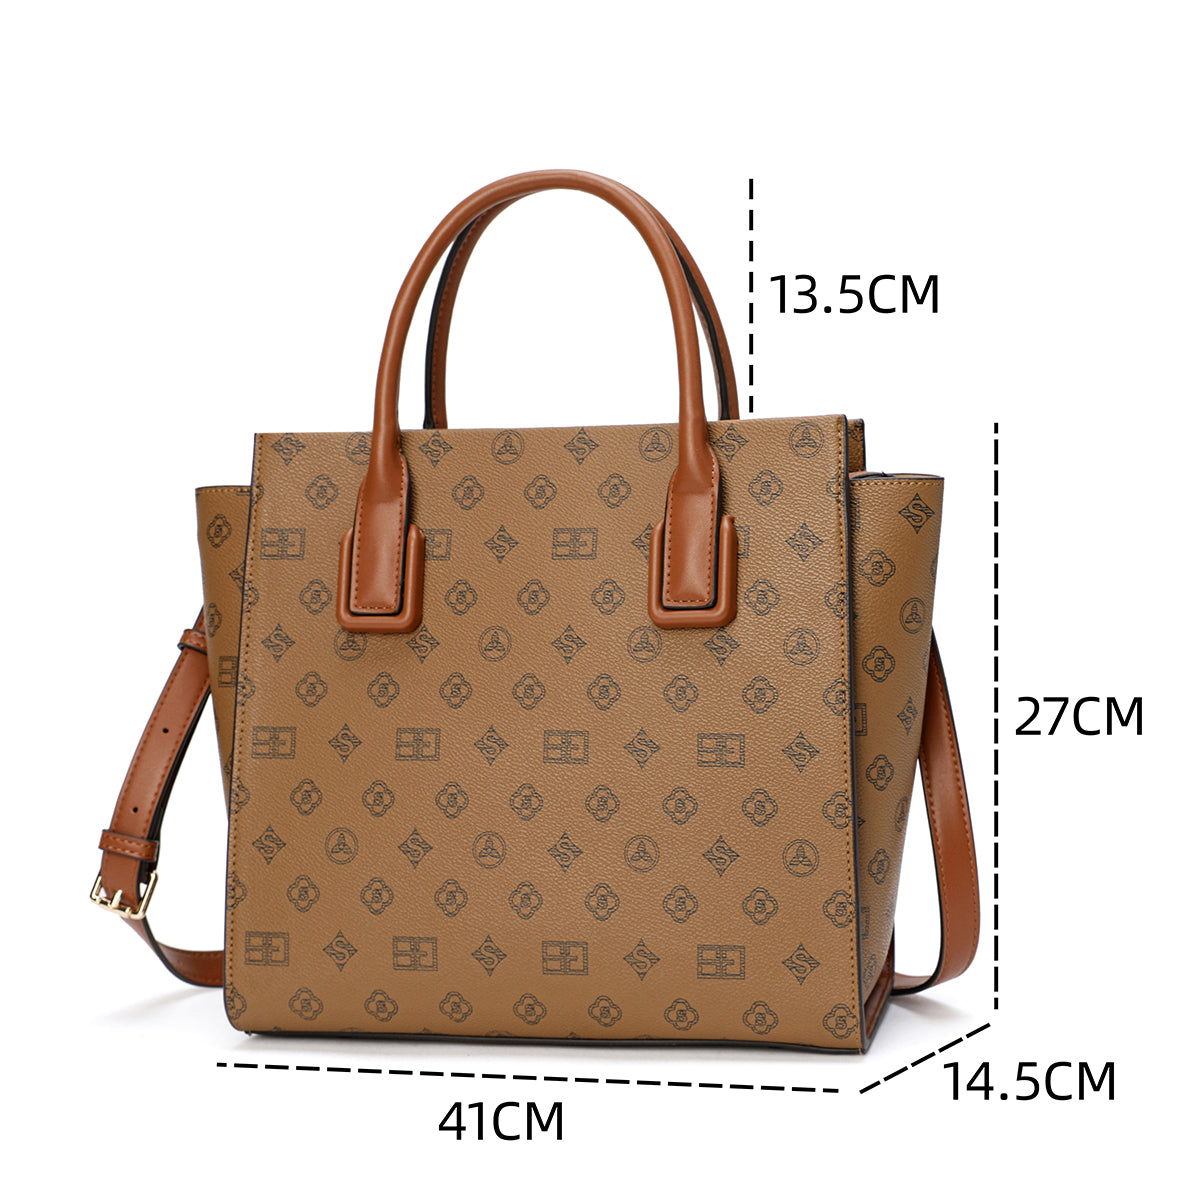 An elegant bag with a spacious design, 41 cm wide, with a shoulder strap, in brown or tan color